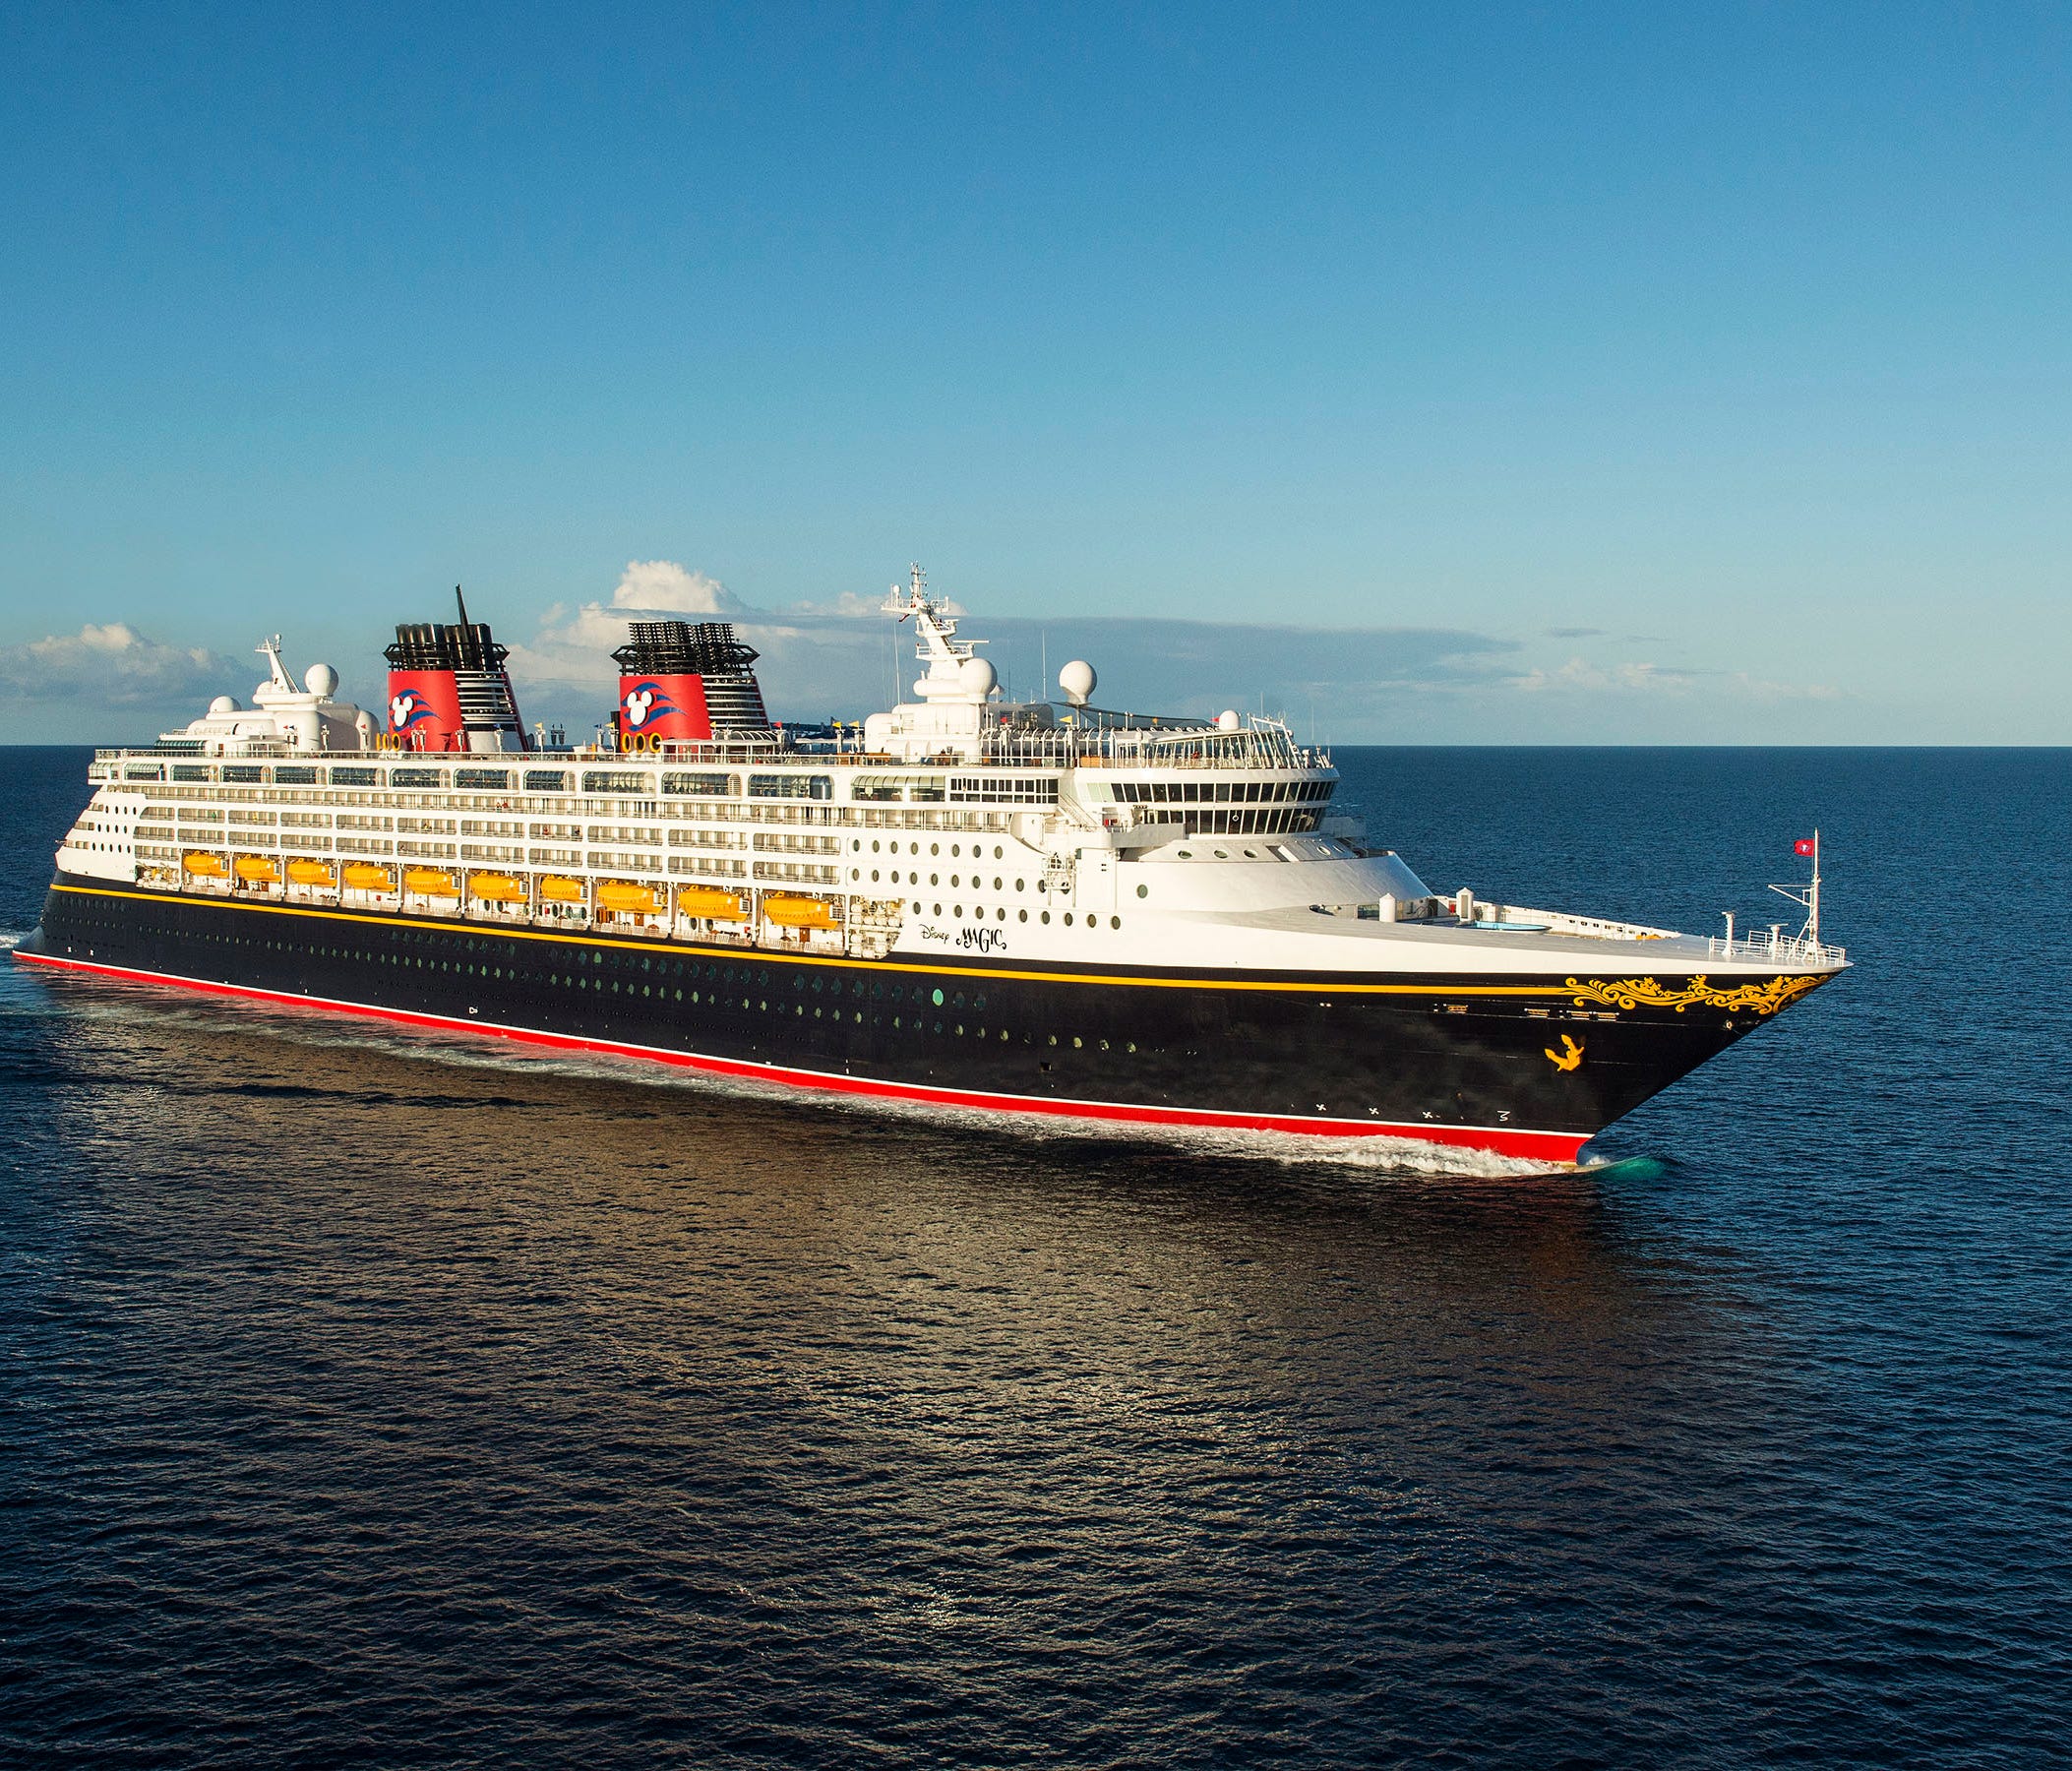 Disney Cruise Line's 1,754-passenger Disney Magic will sail to Bermuda in 2018 -- a first for the line.